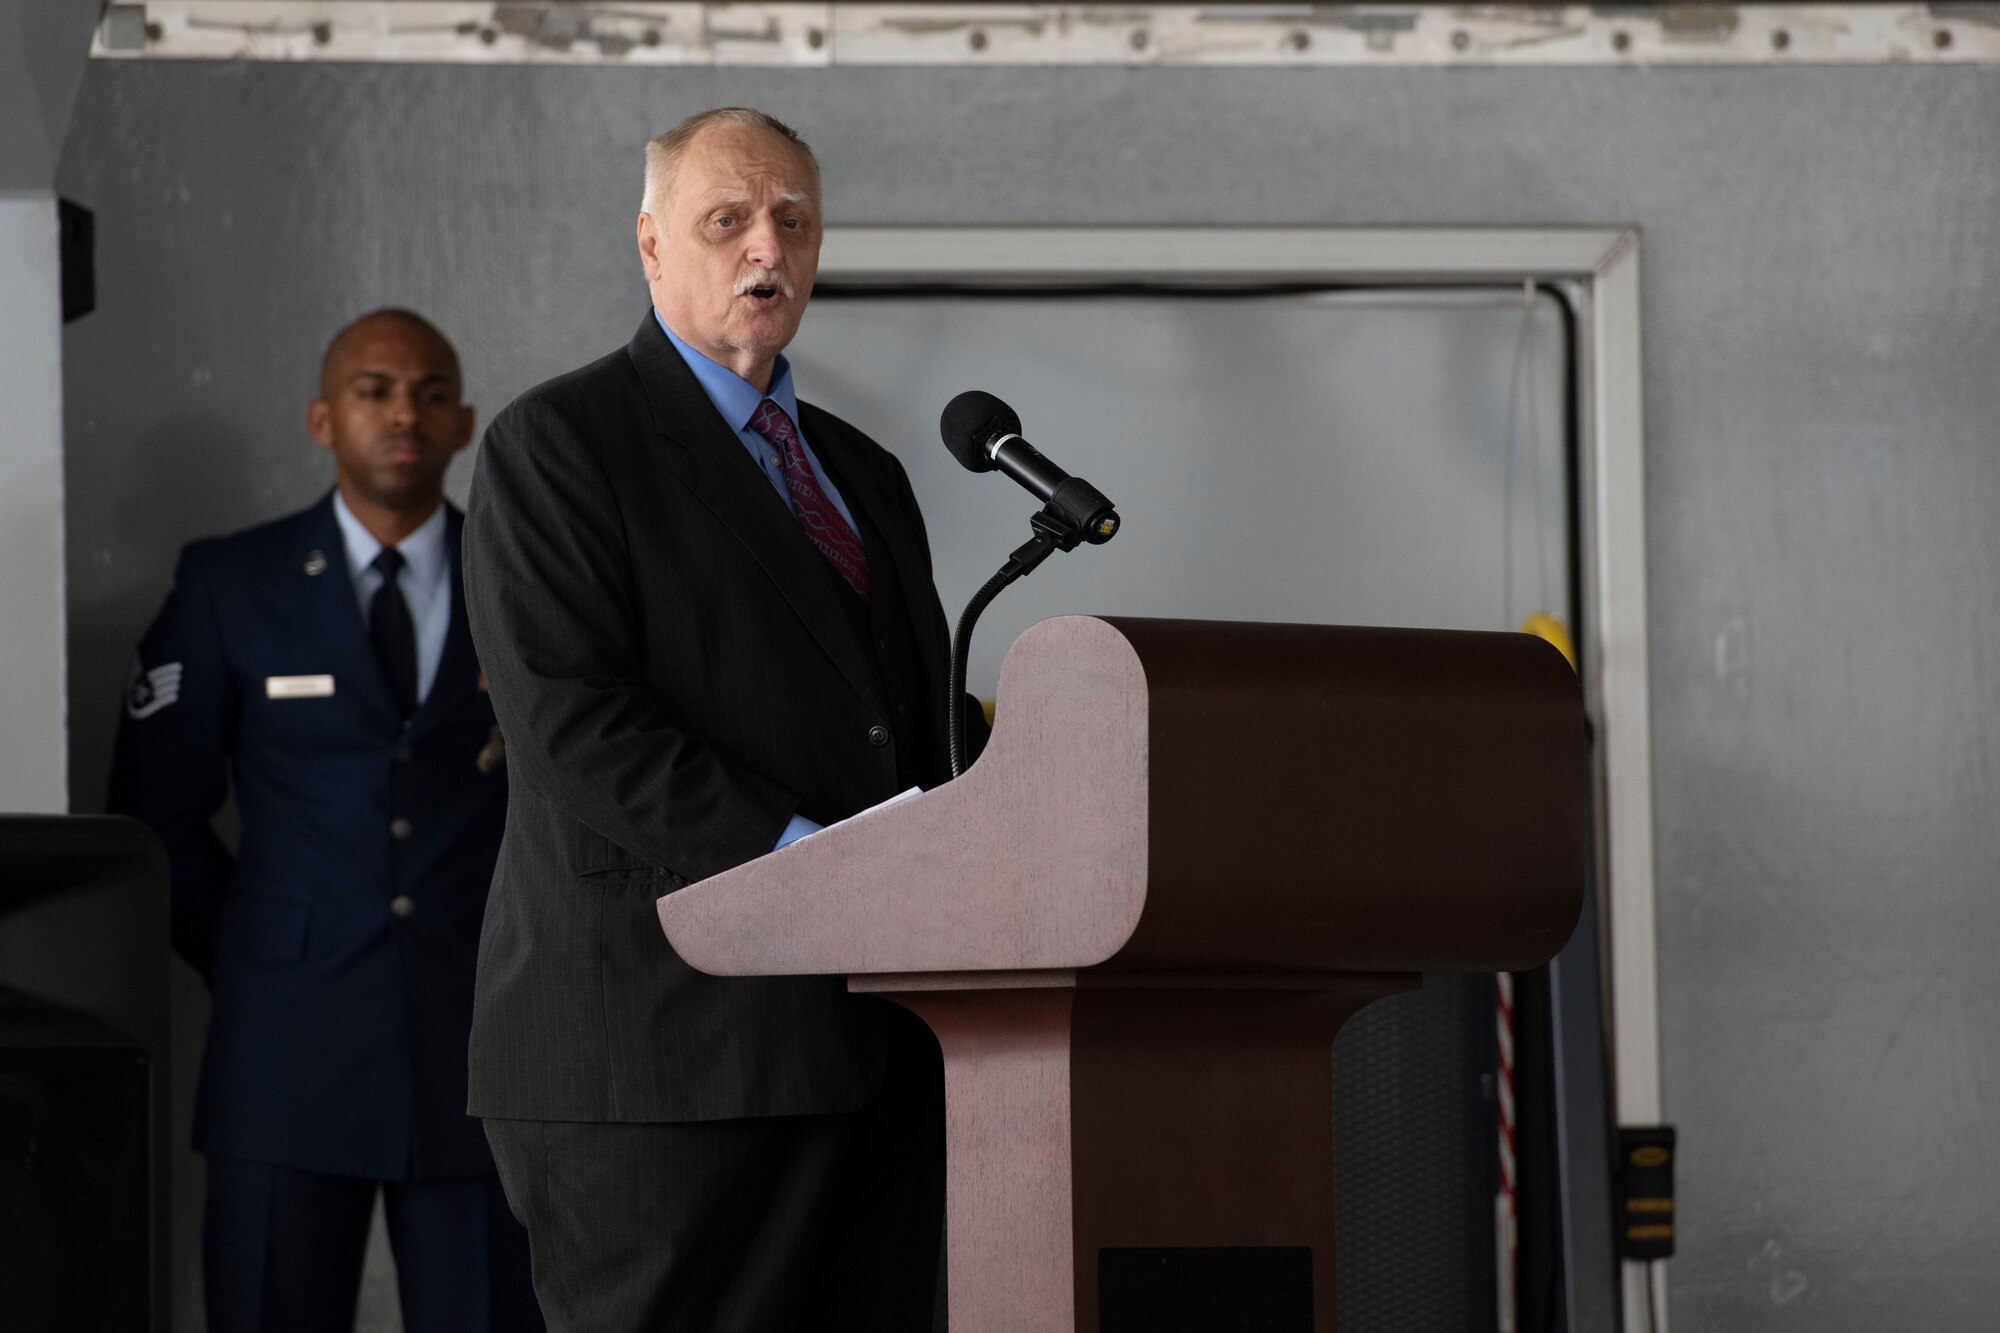 Dr. Silvano Wueschner, Air University historian, speaks during Maxwell Air Force Base's Veteran's Day ceremony Nov. 11, 2020. In attendance was Air University and 42nd Air Base Wing leadership, as well as the Mayor of Montgomery Steven Reed. (U.S. Air Force photo by Senior Airman Charles Welty)